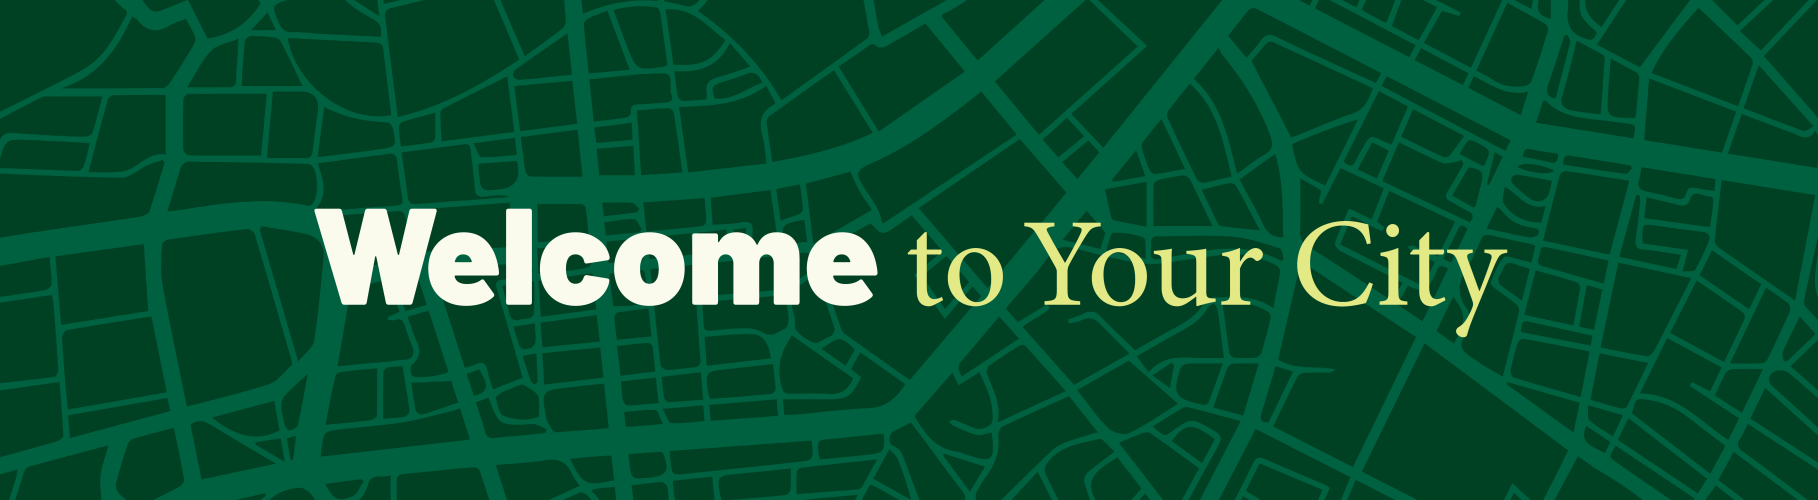 Welcome to Your City banner